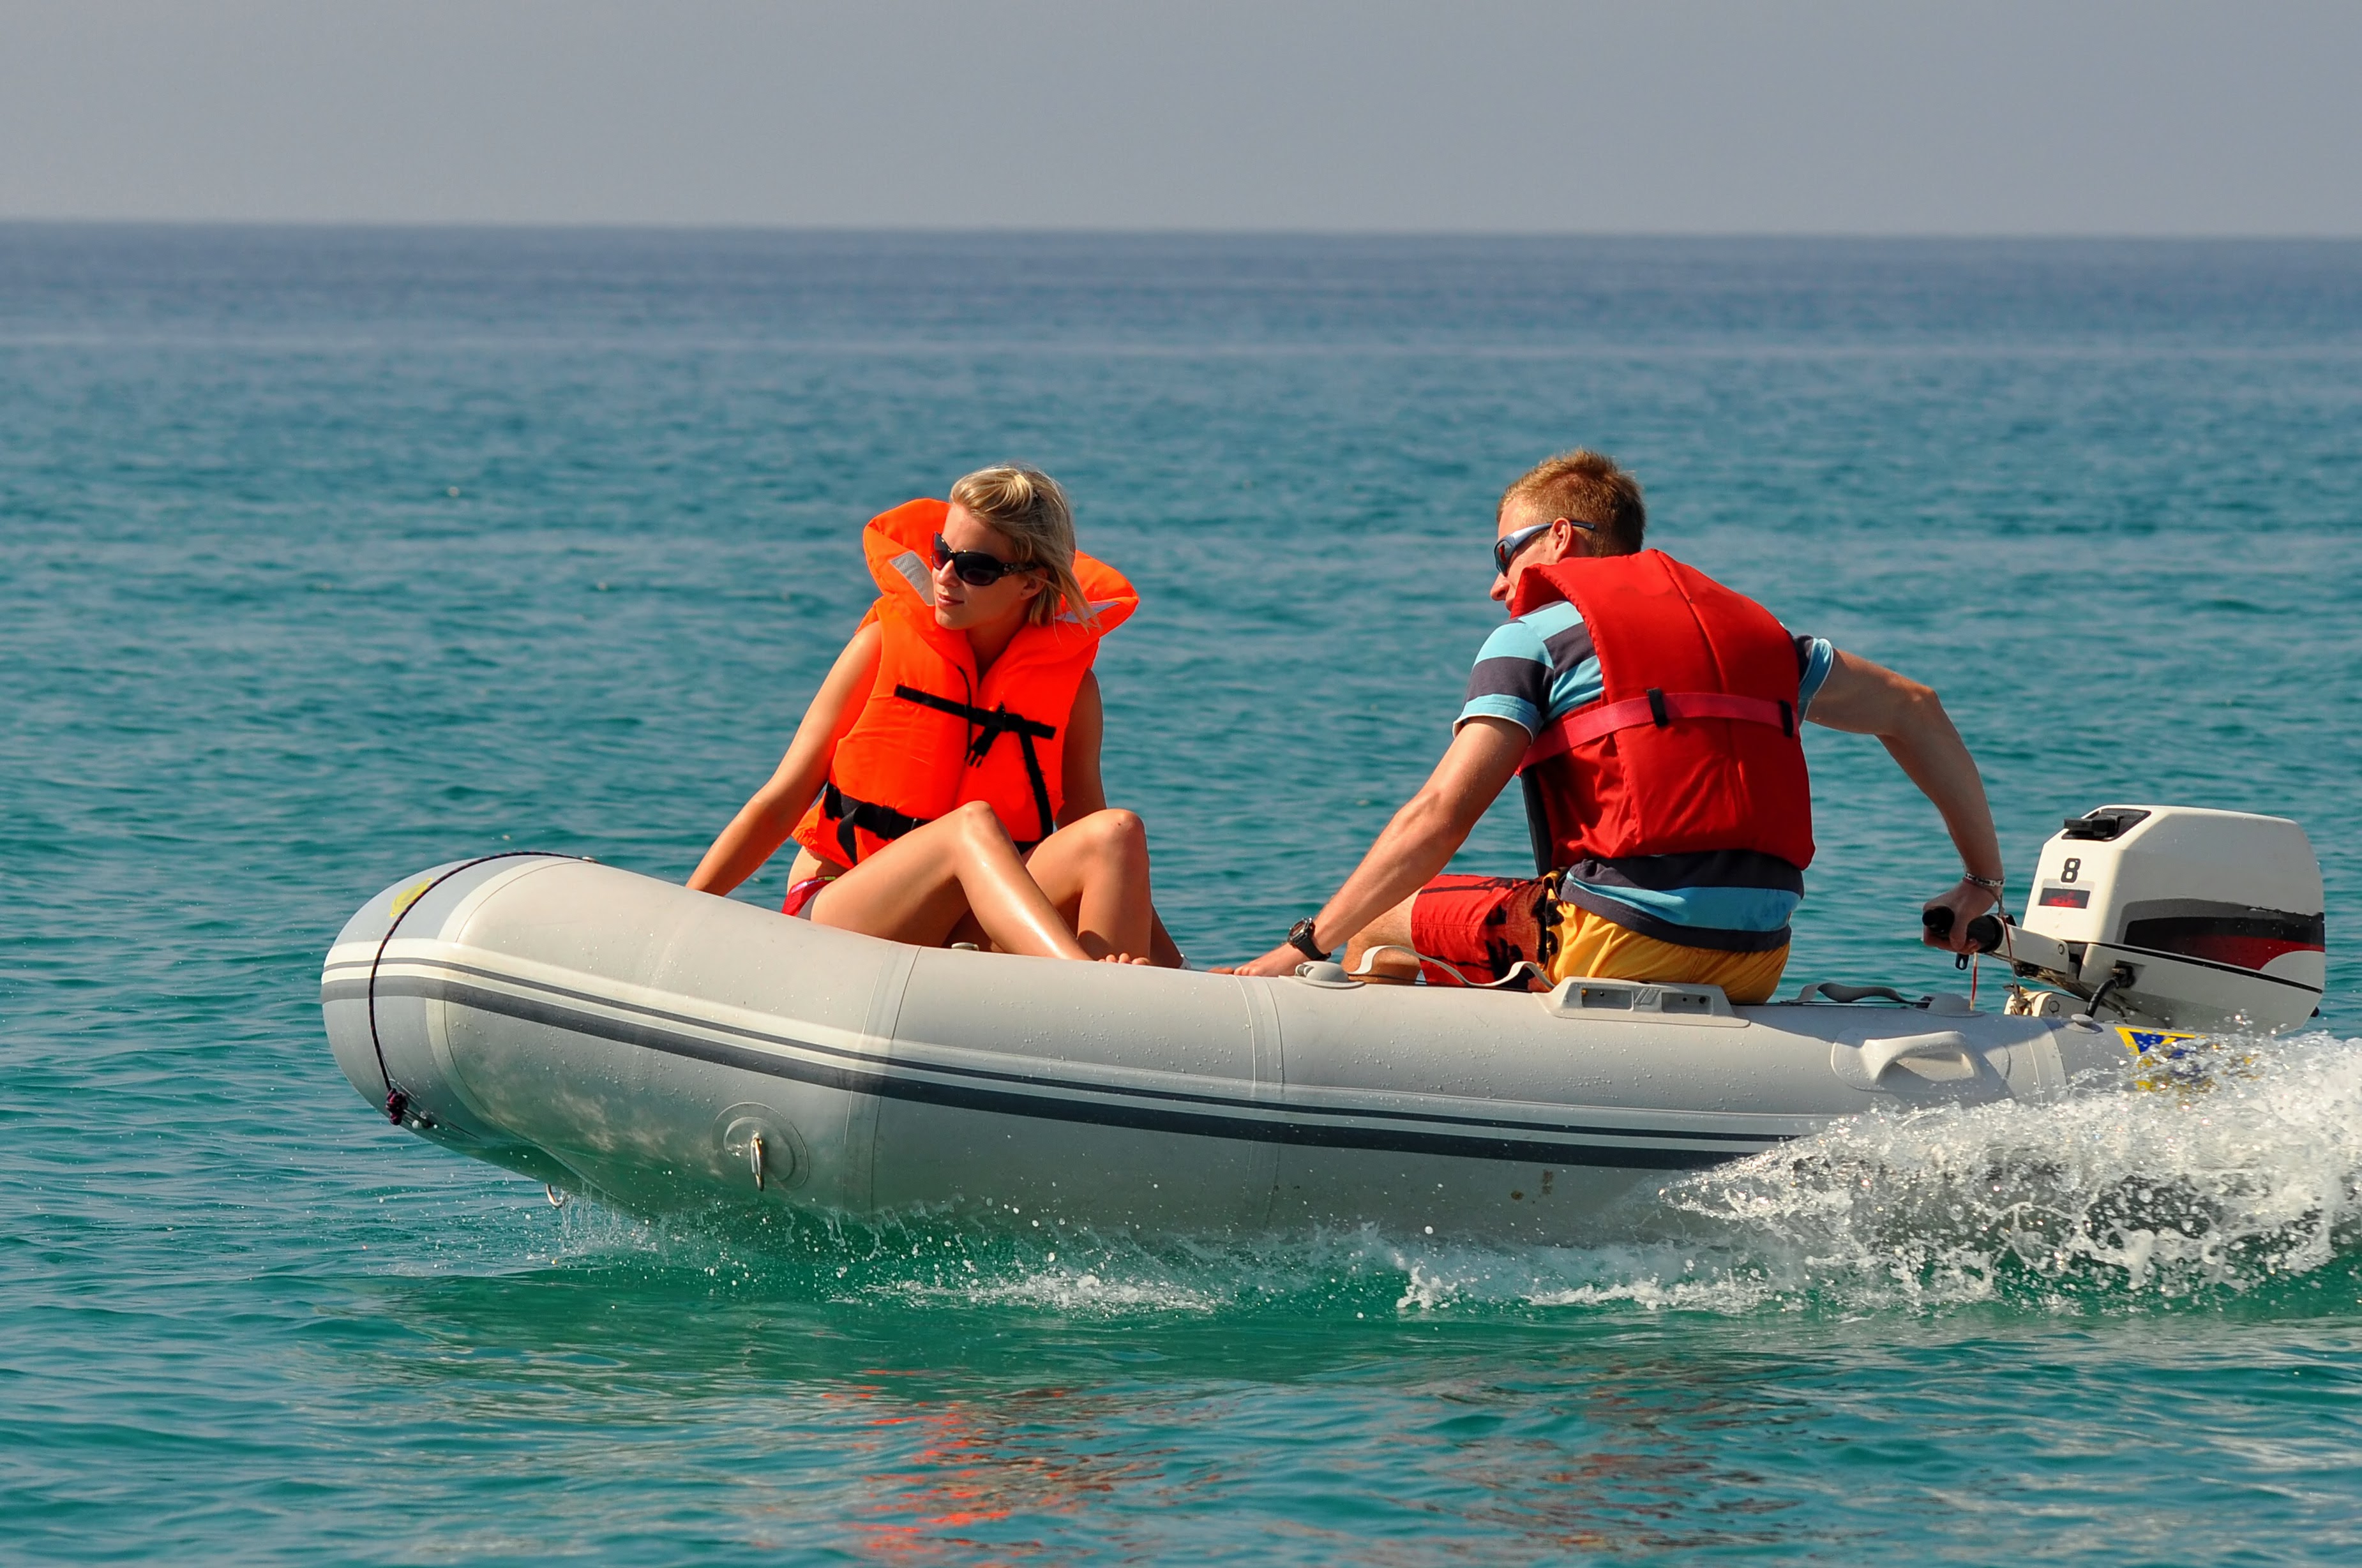 Two people in a motorized inflatable boat wearing life jackets